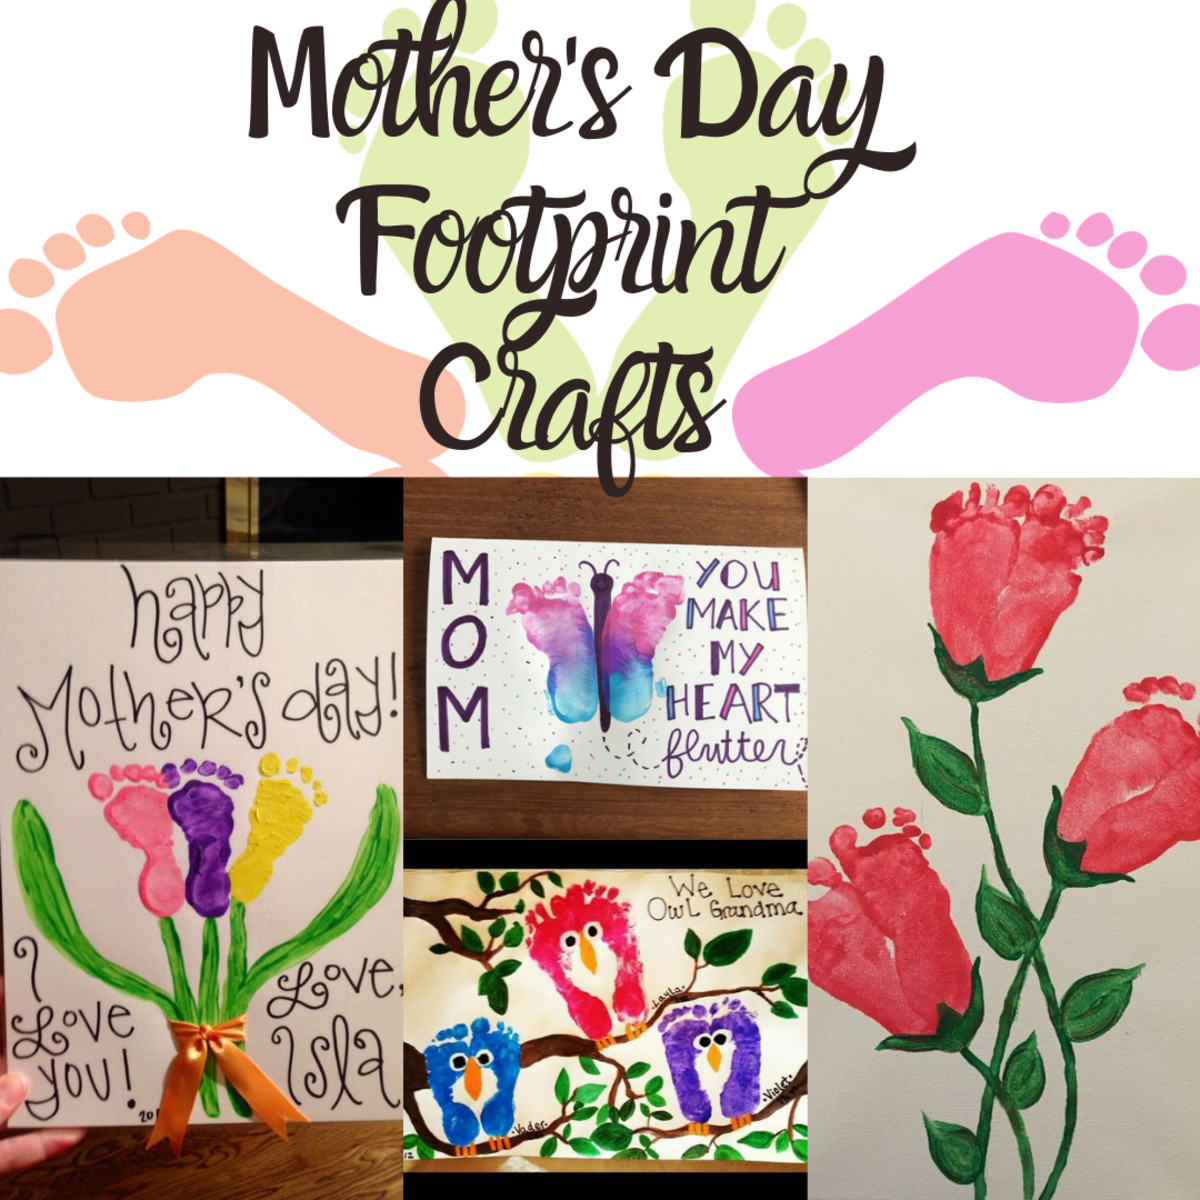 60+ super Cute Foot Print Mothers Day Crafts that Kids will adore making